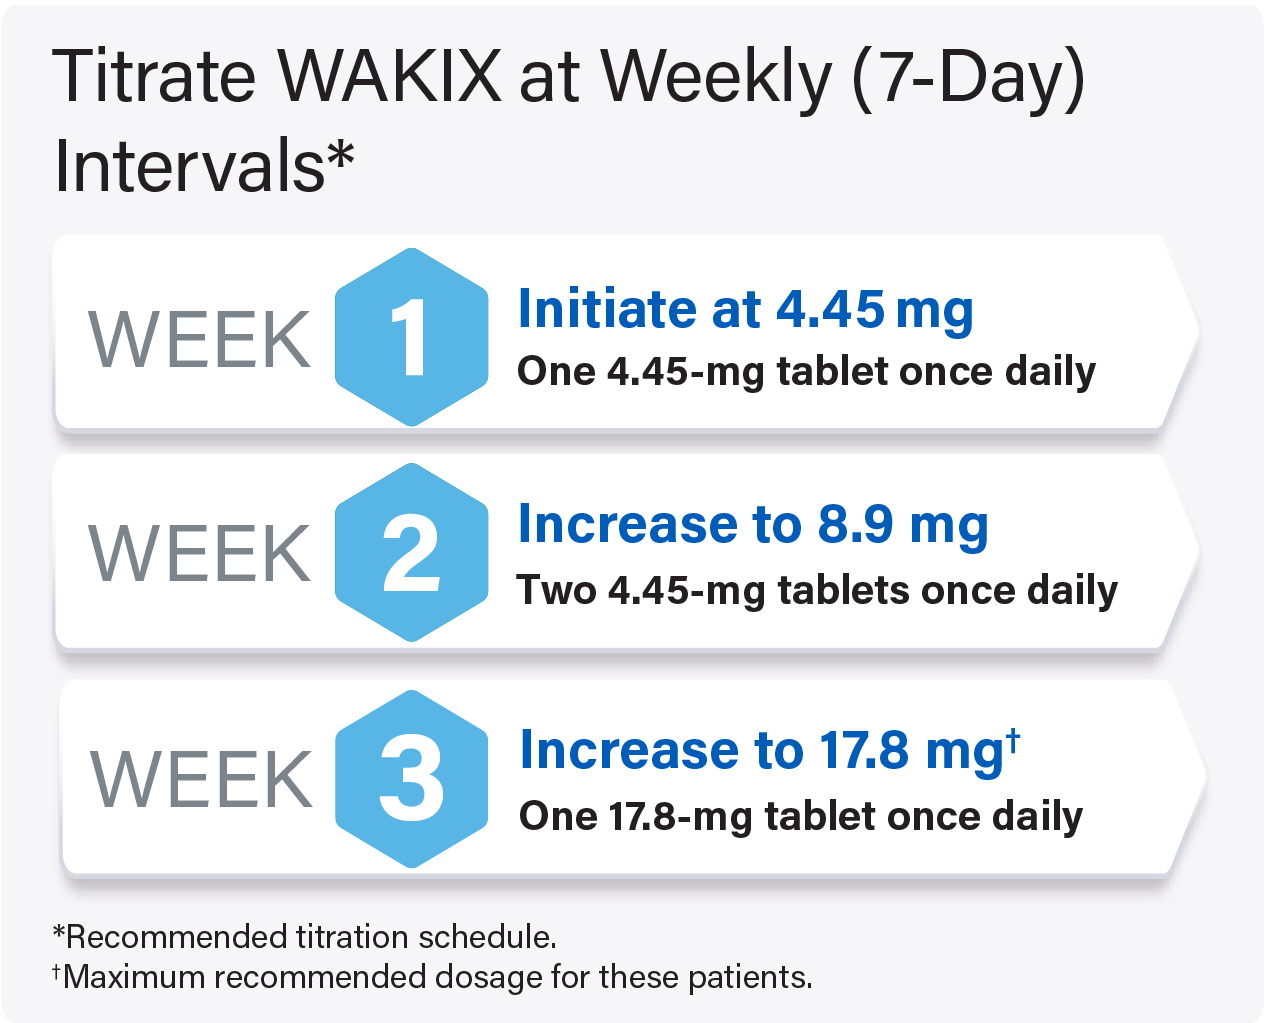 Titration schedule for WAKIX with strong CYP2D6 inhibitors in pediatric patients 40 kg or above graphic